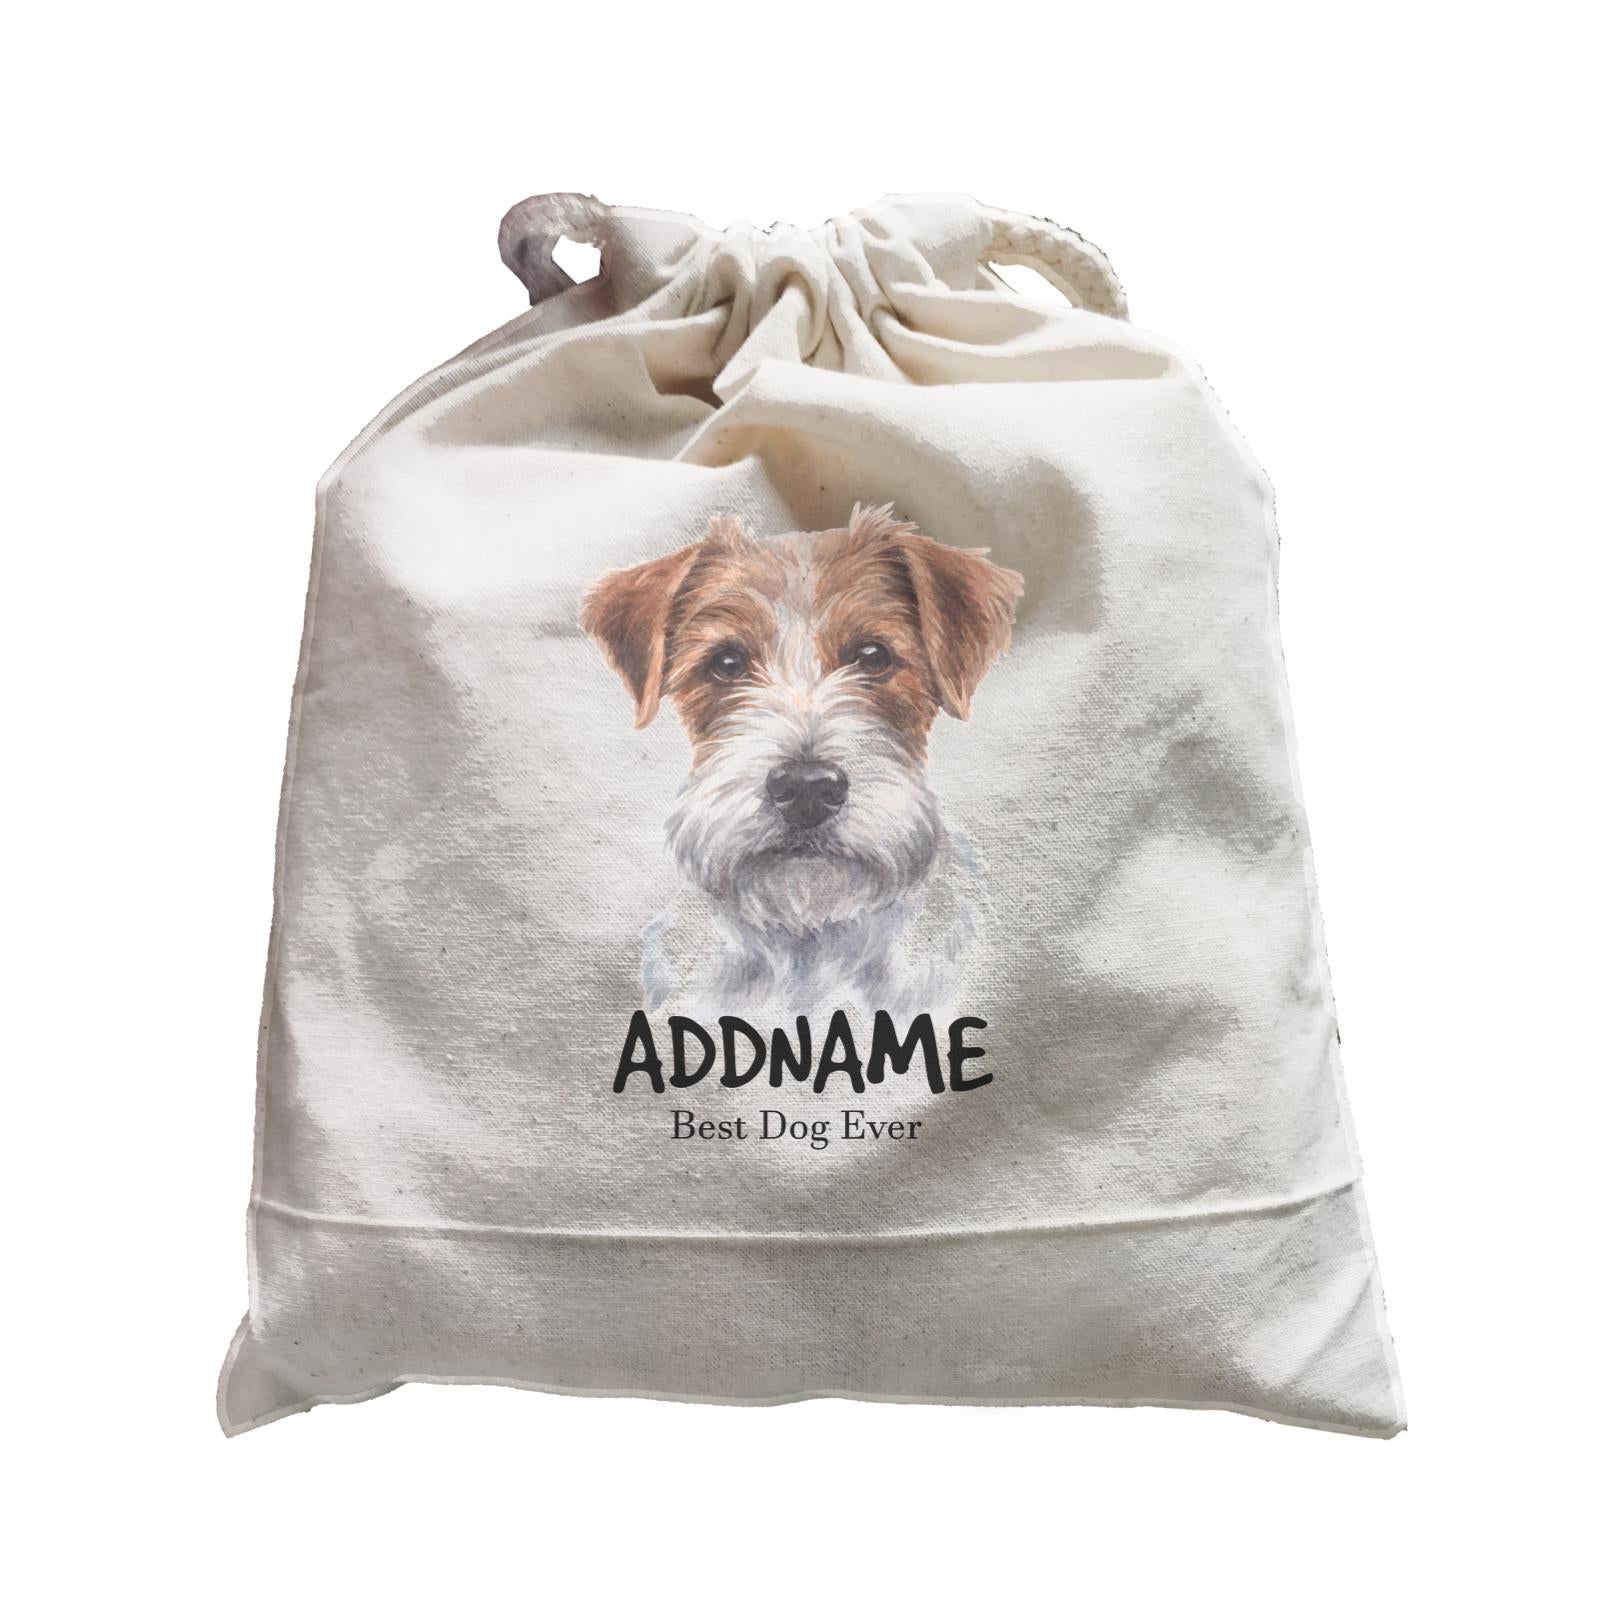 Watercolor Dog Jack Russell Hairy Best Dog Ever Addname Satchel